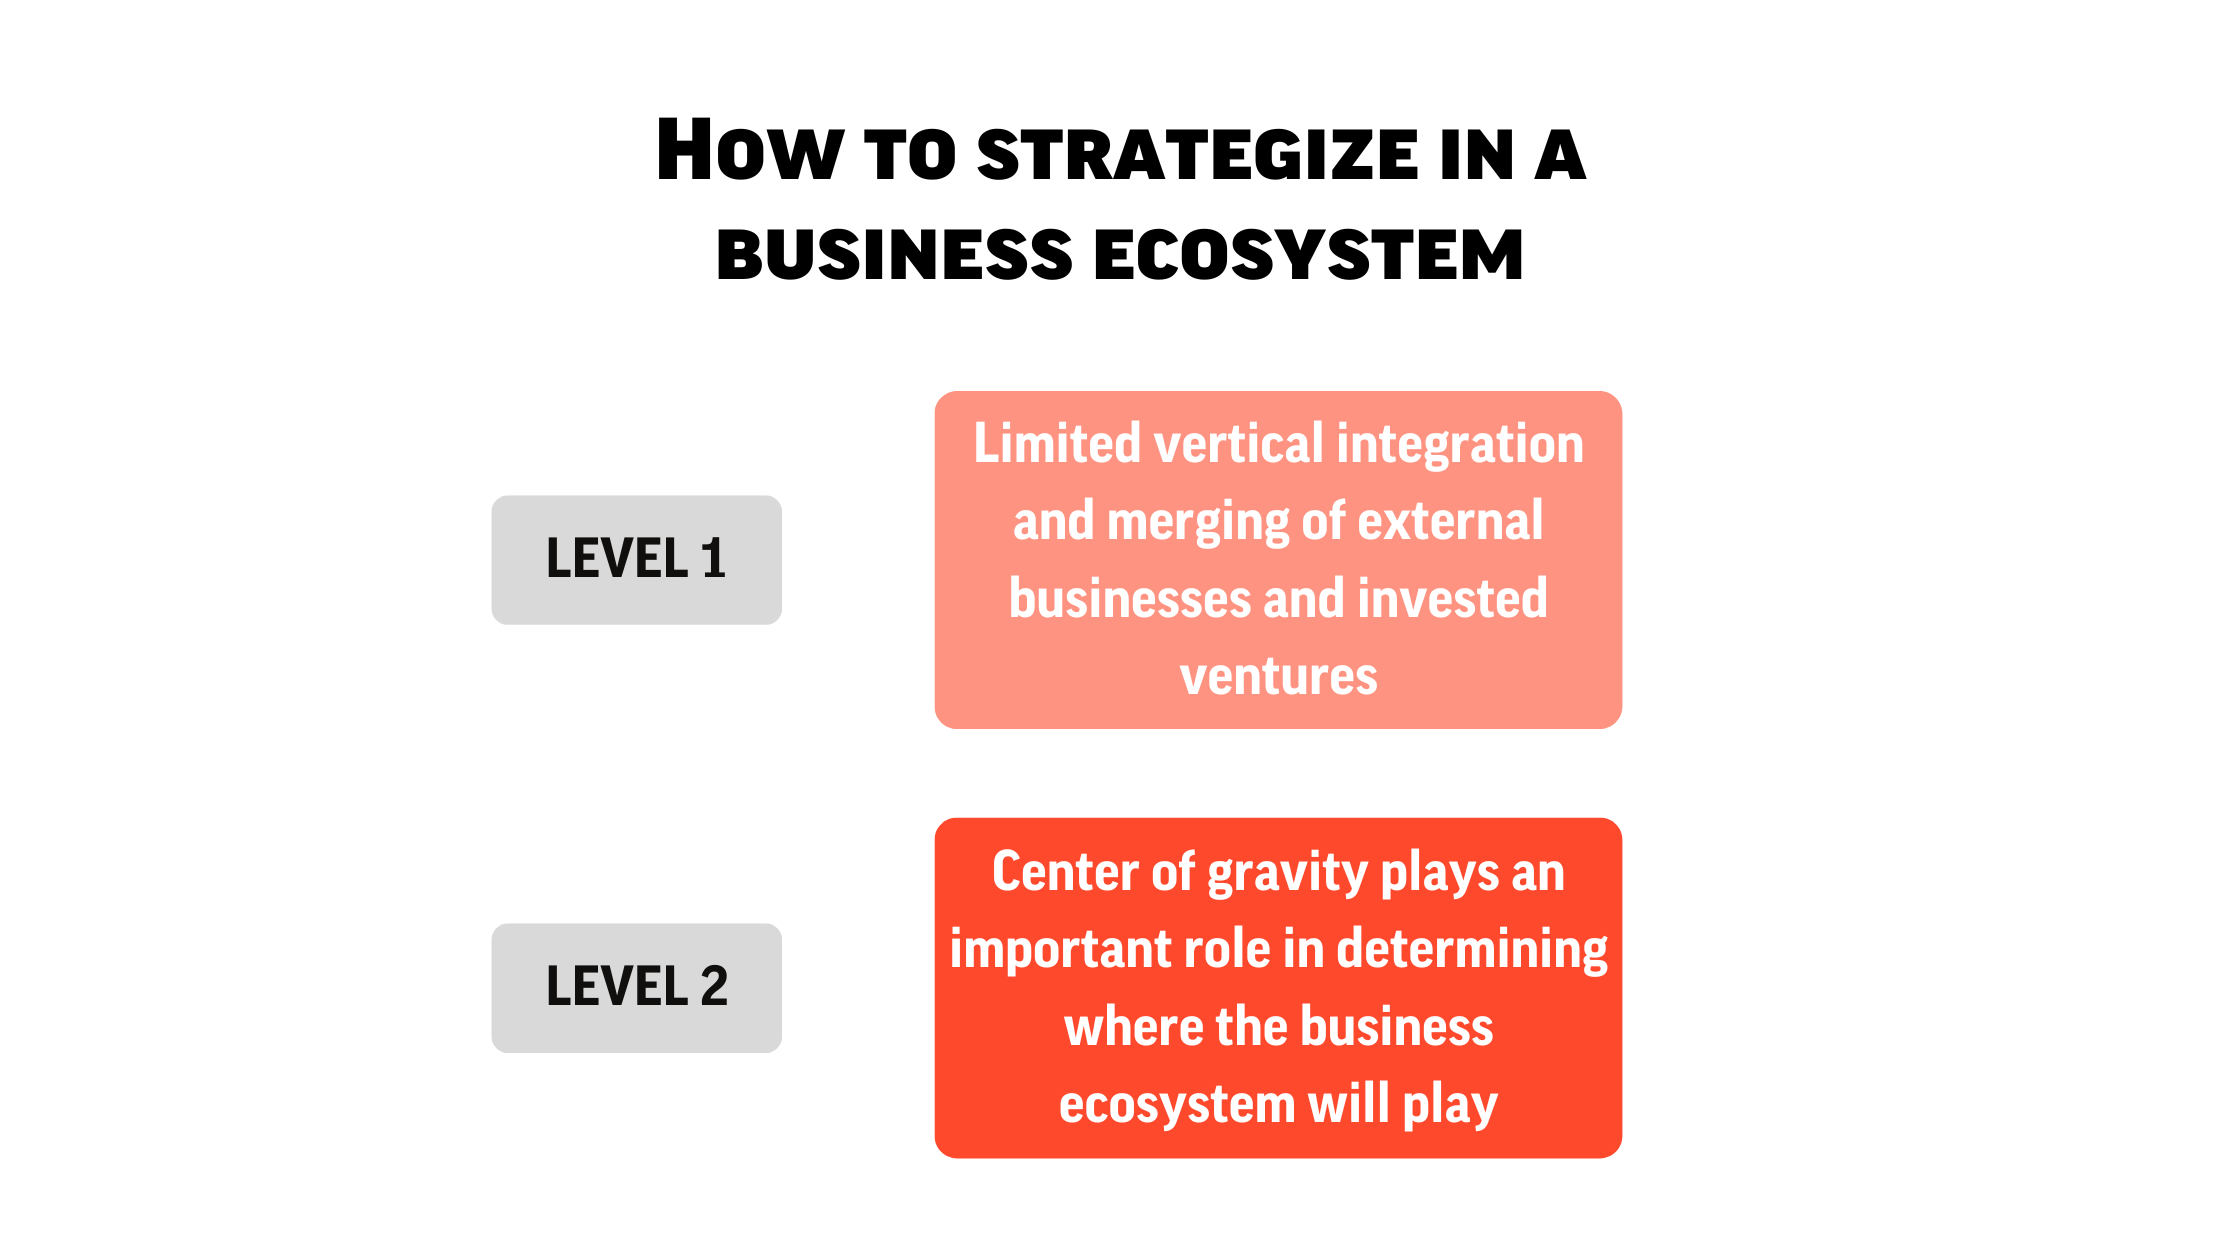 Levels of Strategy in Ecosystem